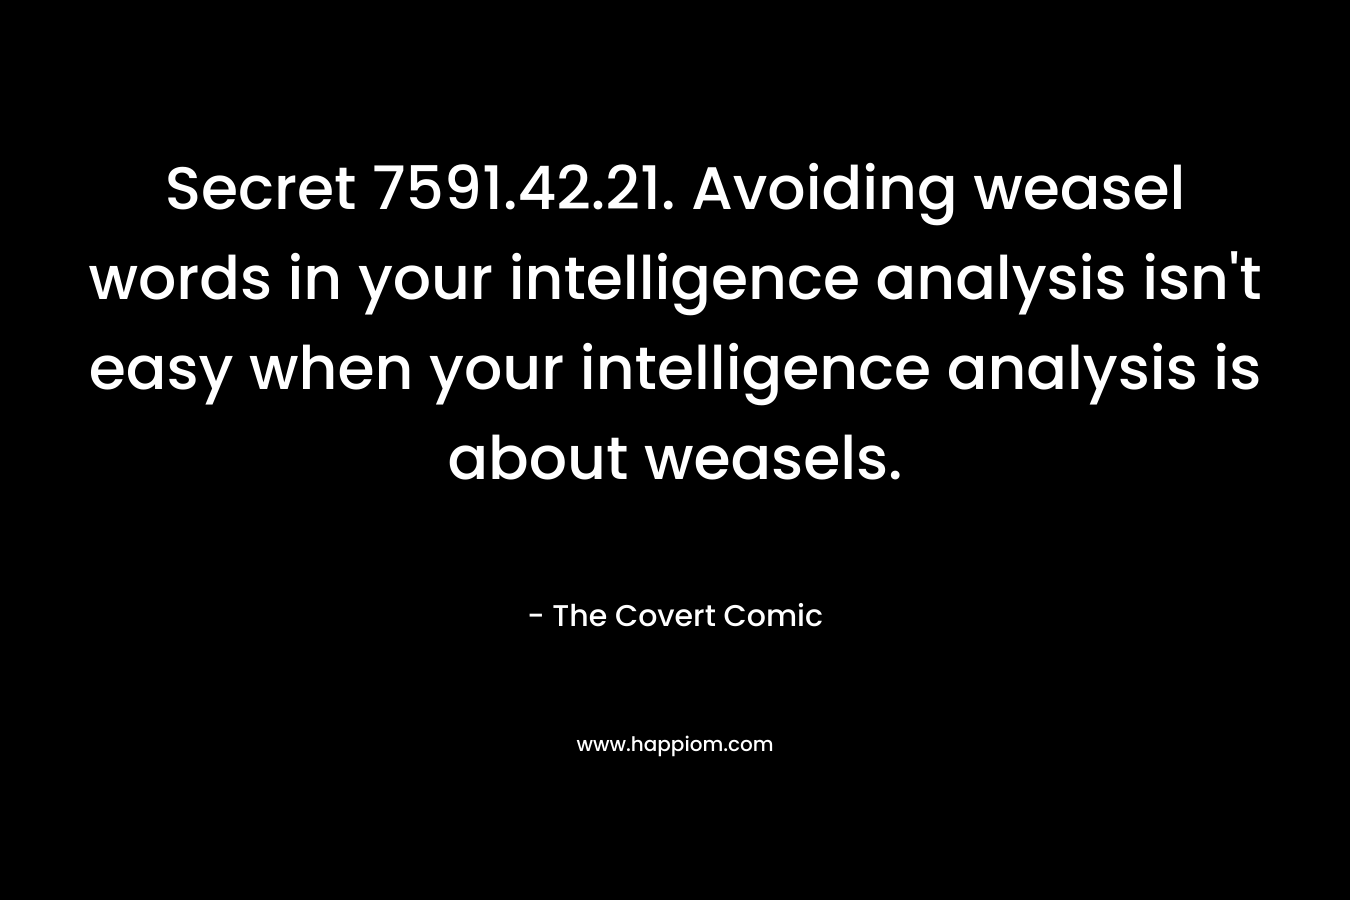 Secret 7591.42.21. Avoiding weasel words in your intelligence analysis isn't easy when your intelligence analysis is about weasels.